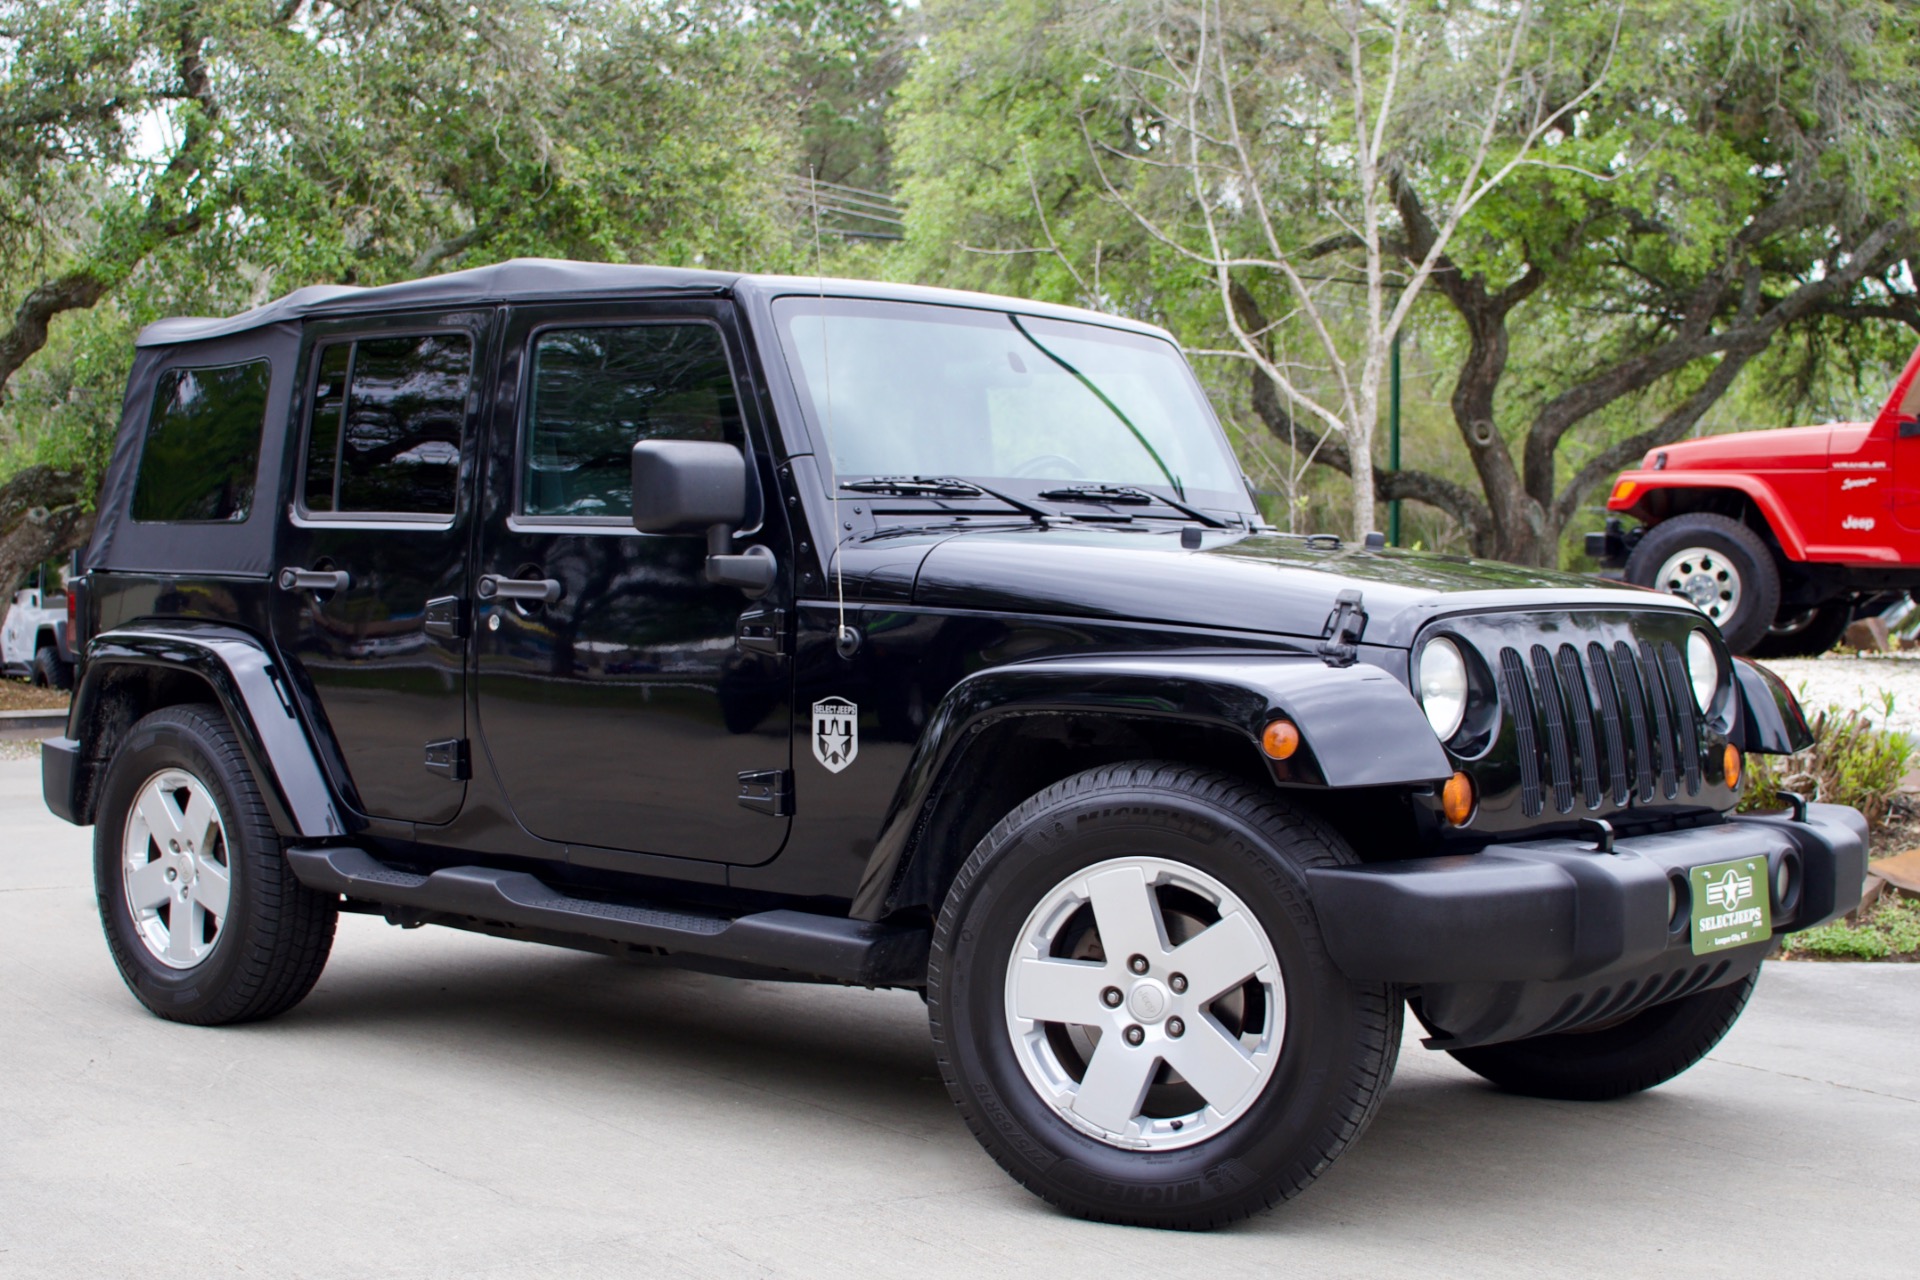 Used 2007 Jeep Wrangler Unlimited Sahara For Sale ($13,995) | Select Jeeps  Inc. Stock #165466